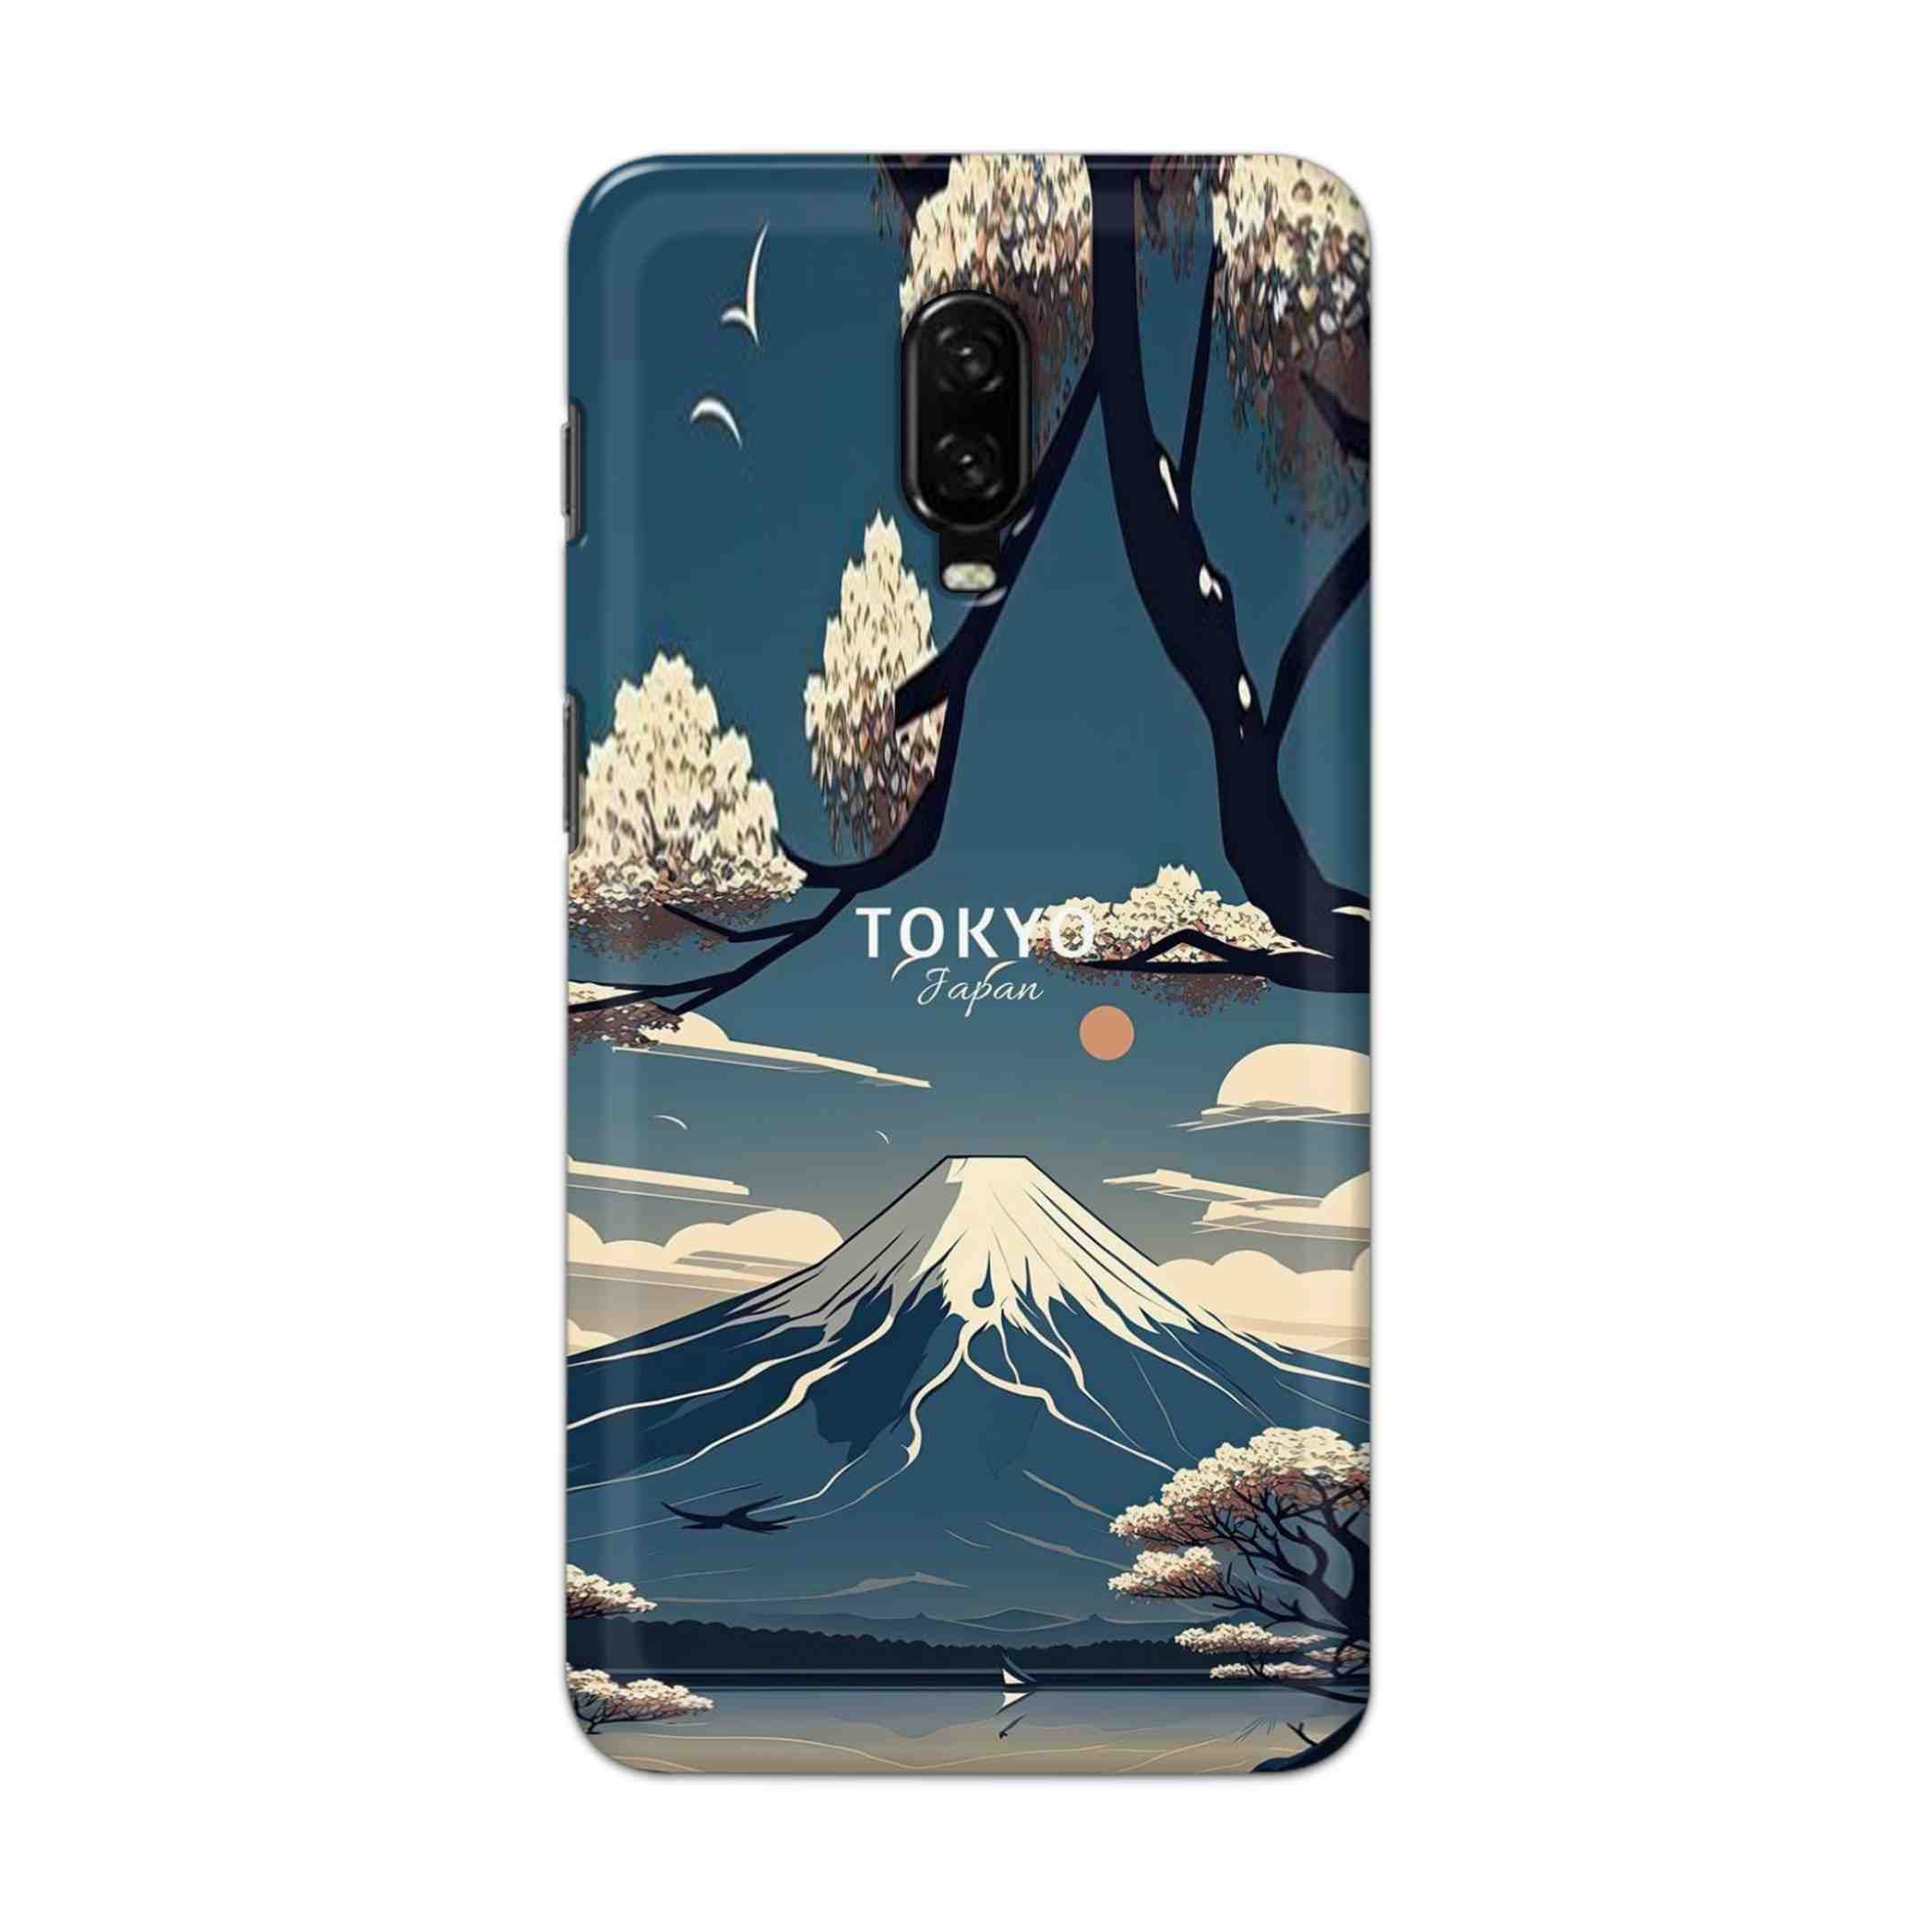 Buy Tokyo Hard Back Mobile Phone Case Cover For OnePlus 6T Online